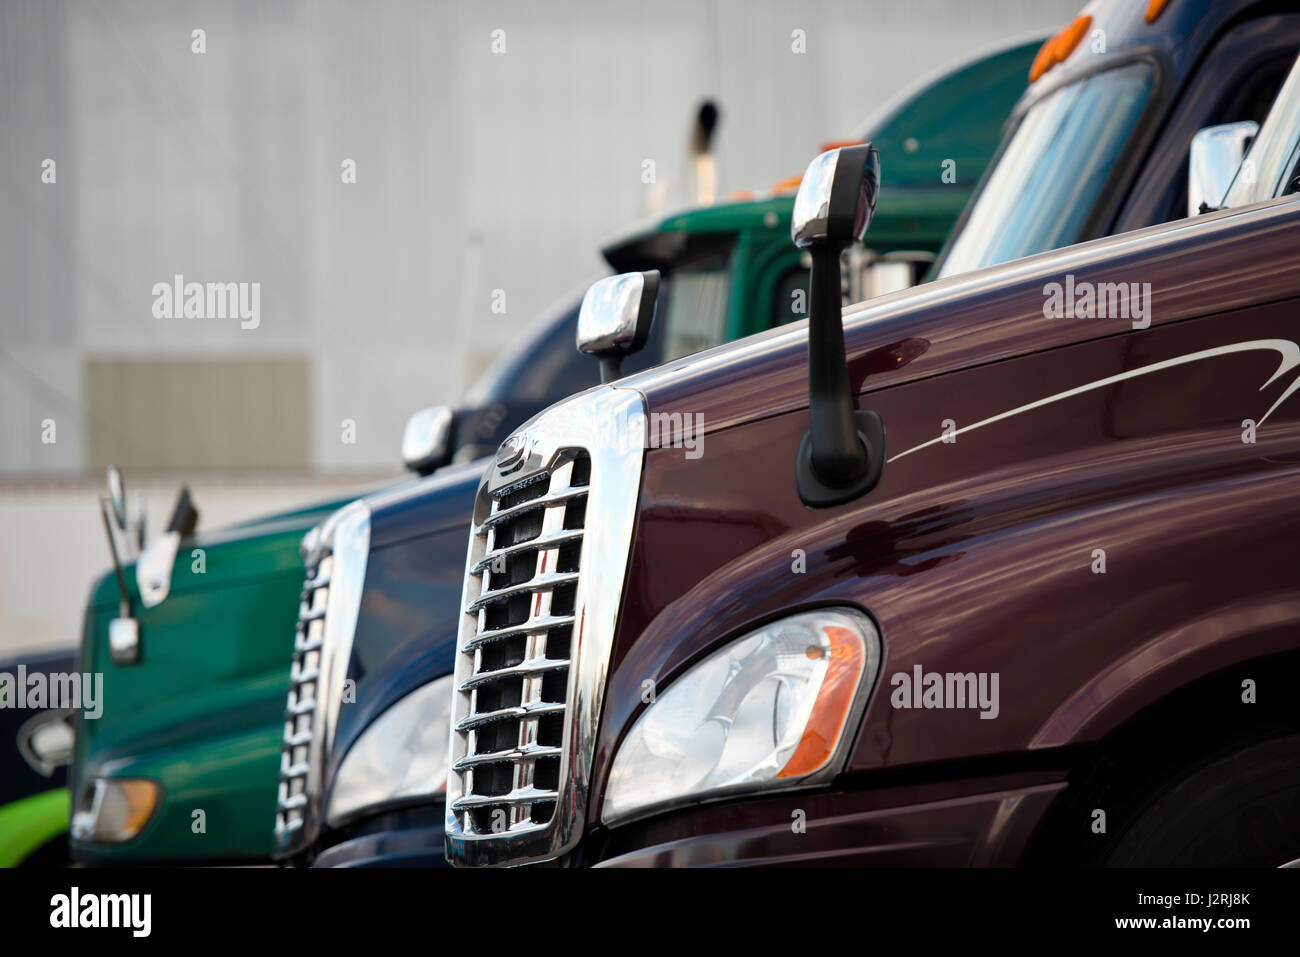 Chrome grille and headlights stylish and modern mirrors and hood with glass booths modern semi trucks of different coulors lined up on a platform Stock Photo